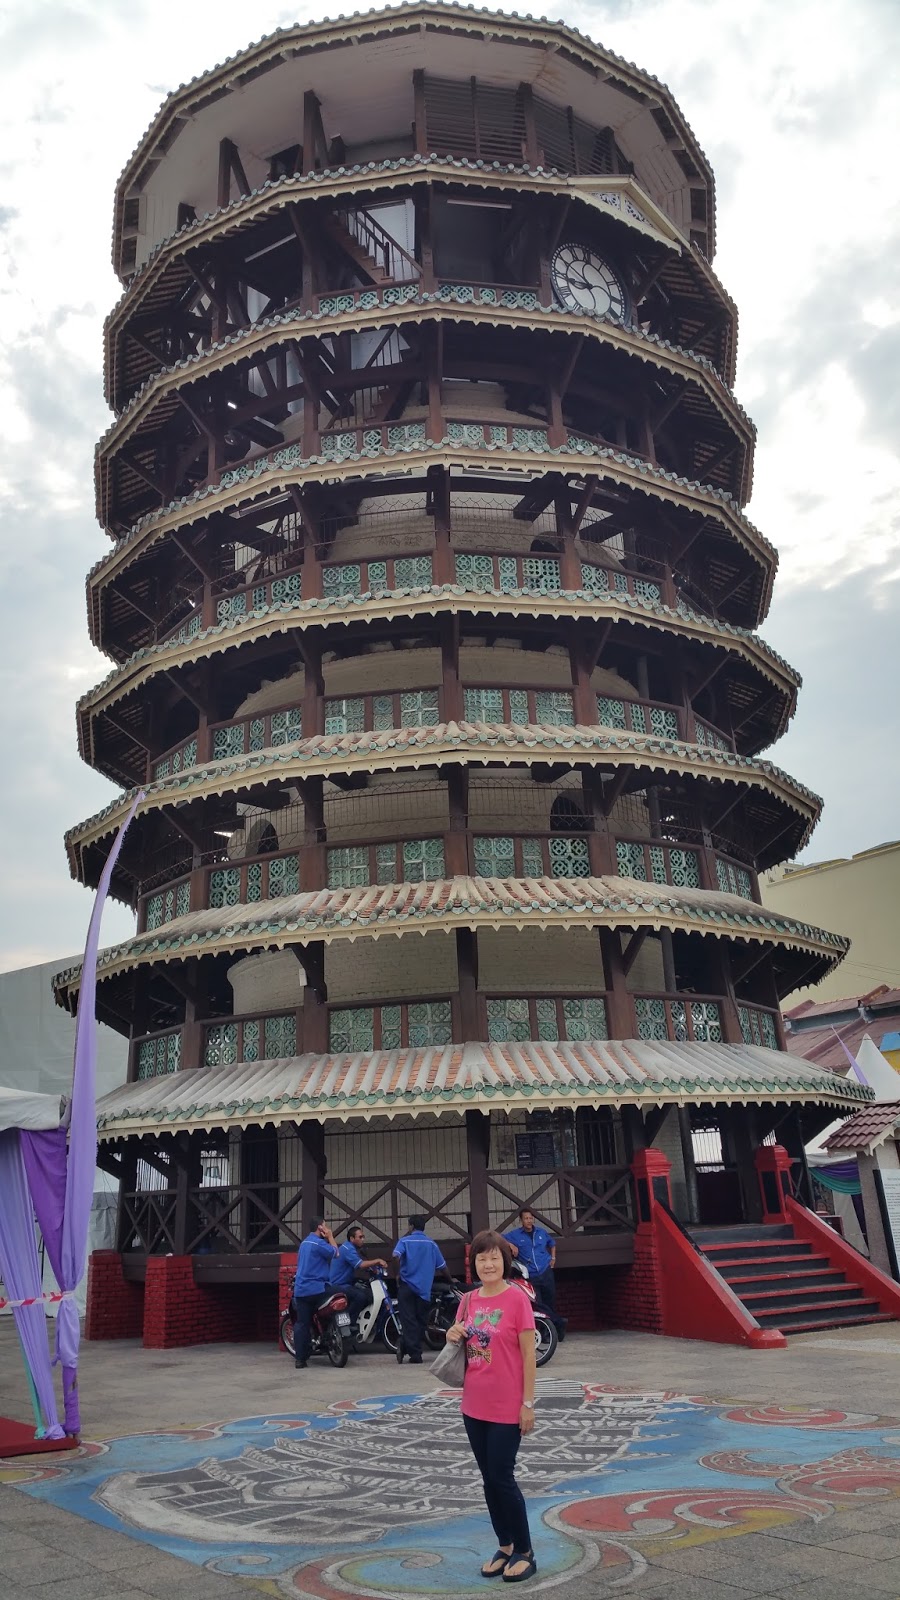 Xing Fu: VISITING THE LEANING TOWER OF TELUK INTAN